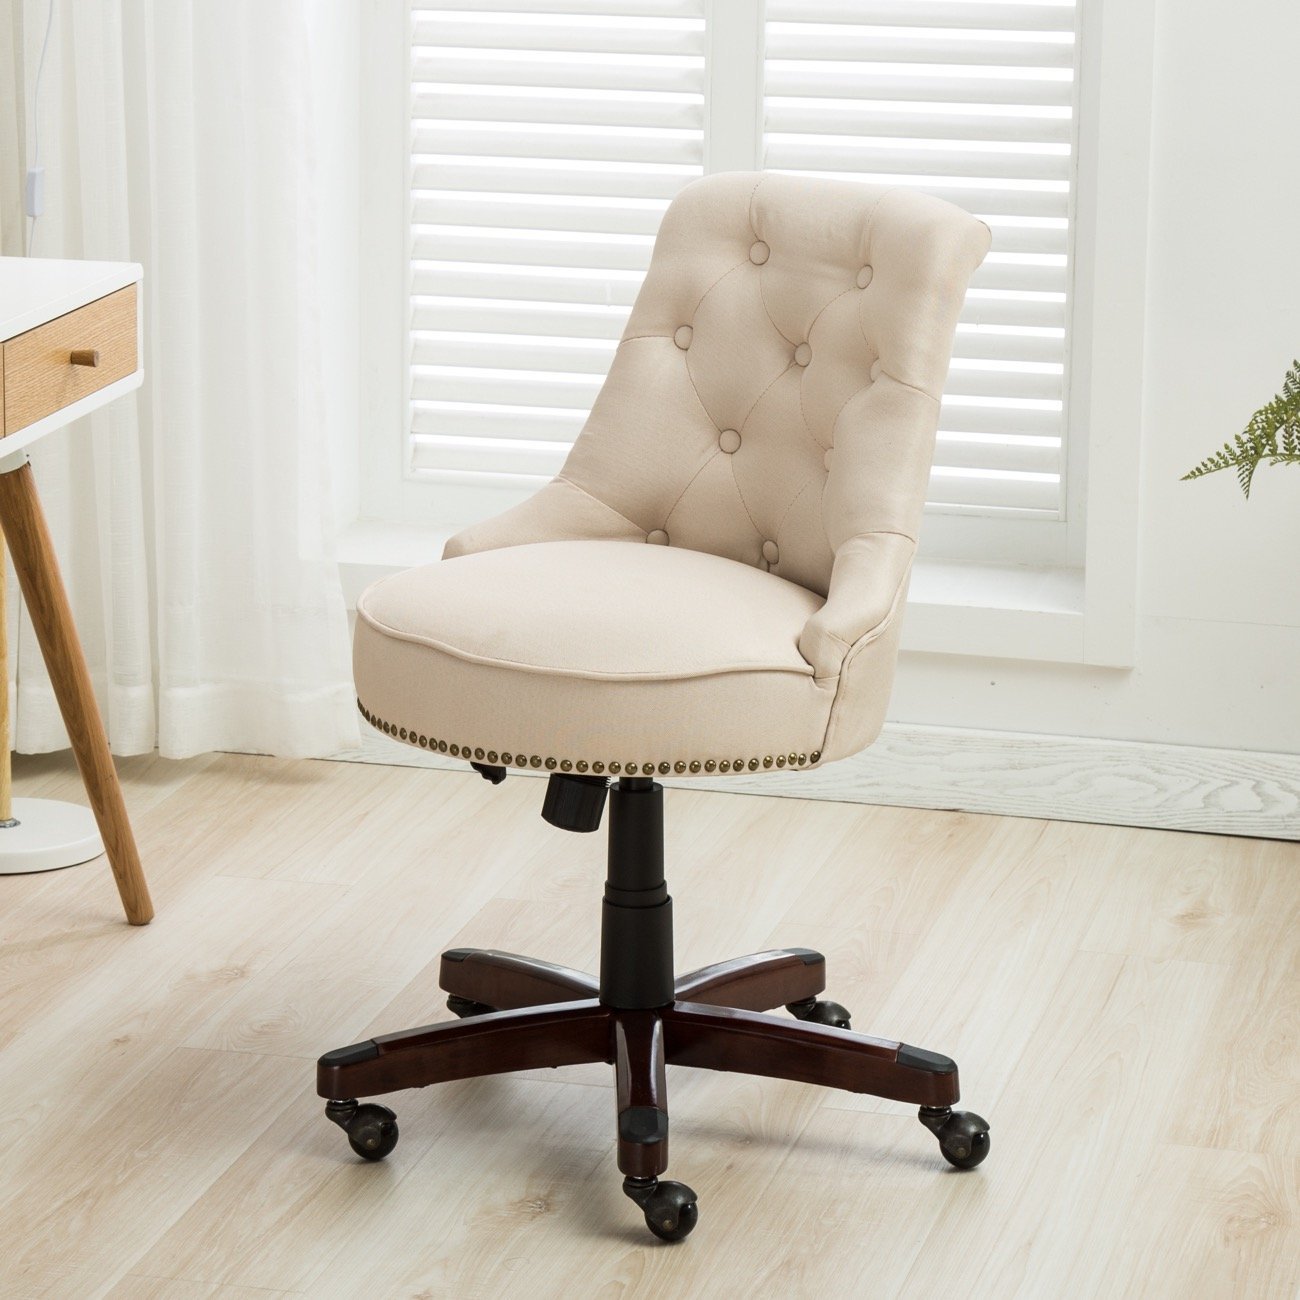 12 most comfortable office chairs under 200  happily ever